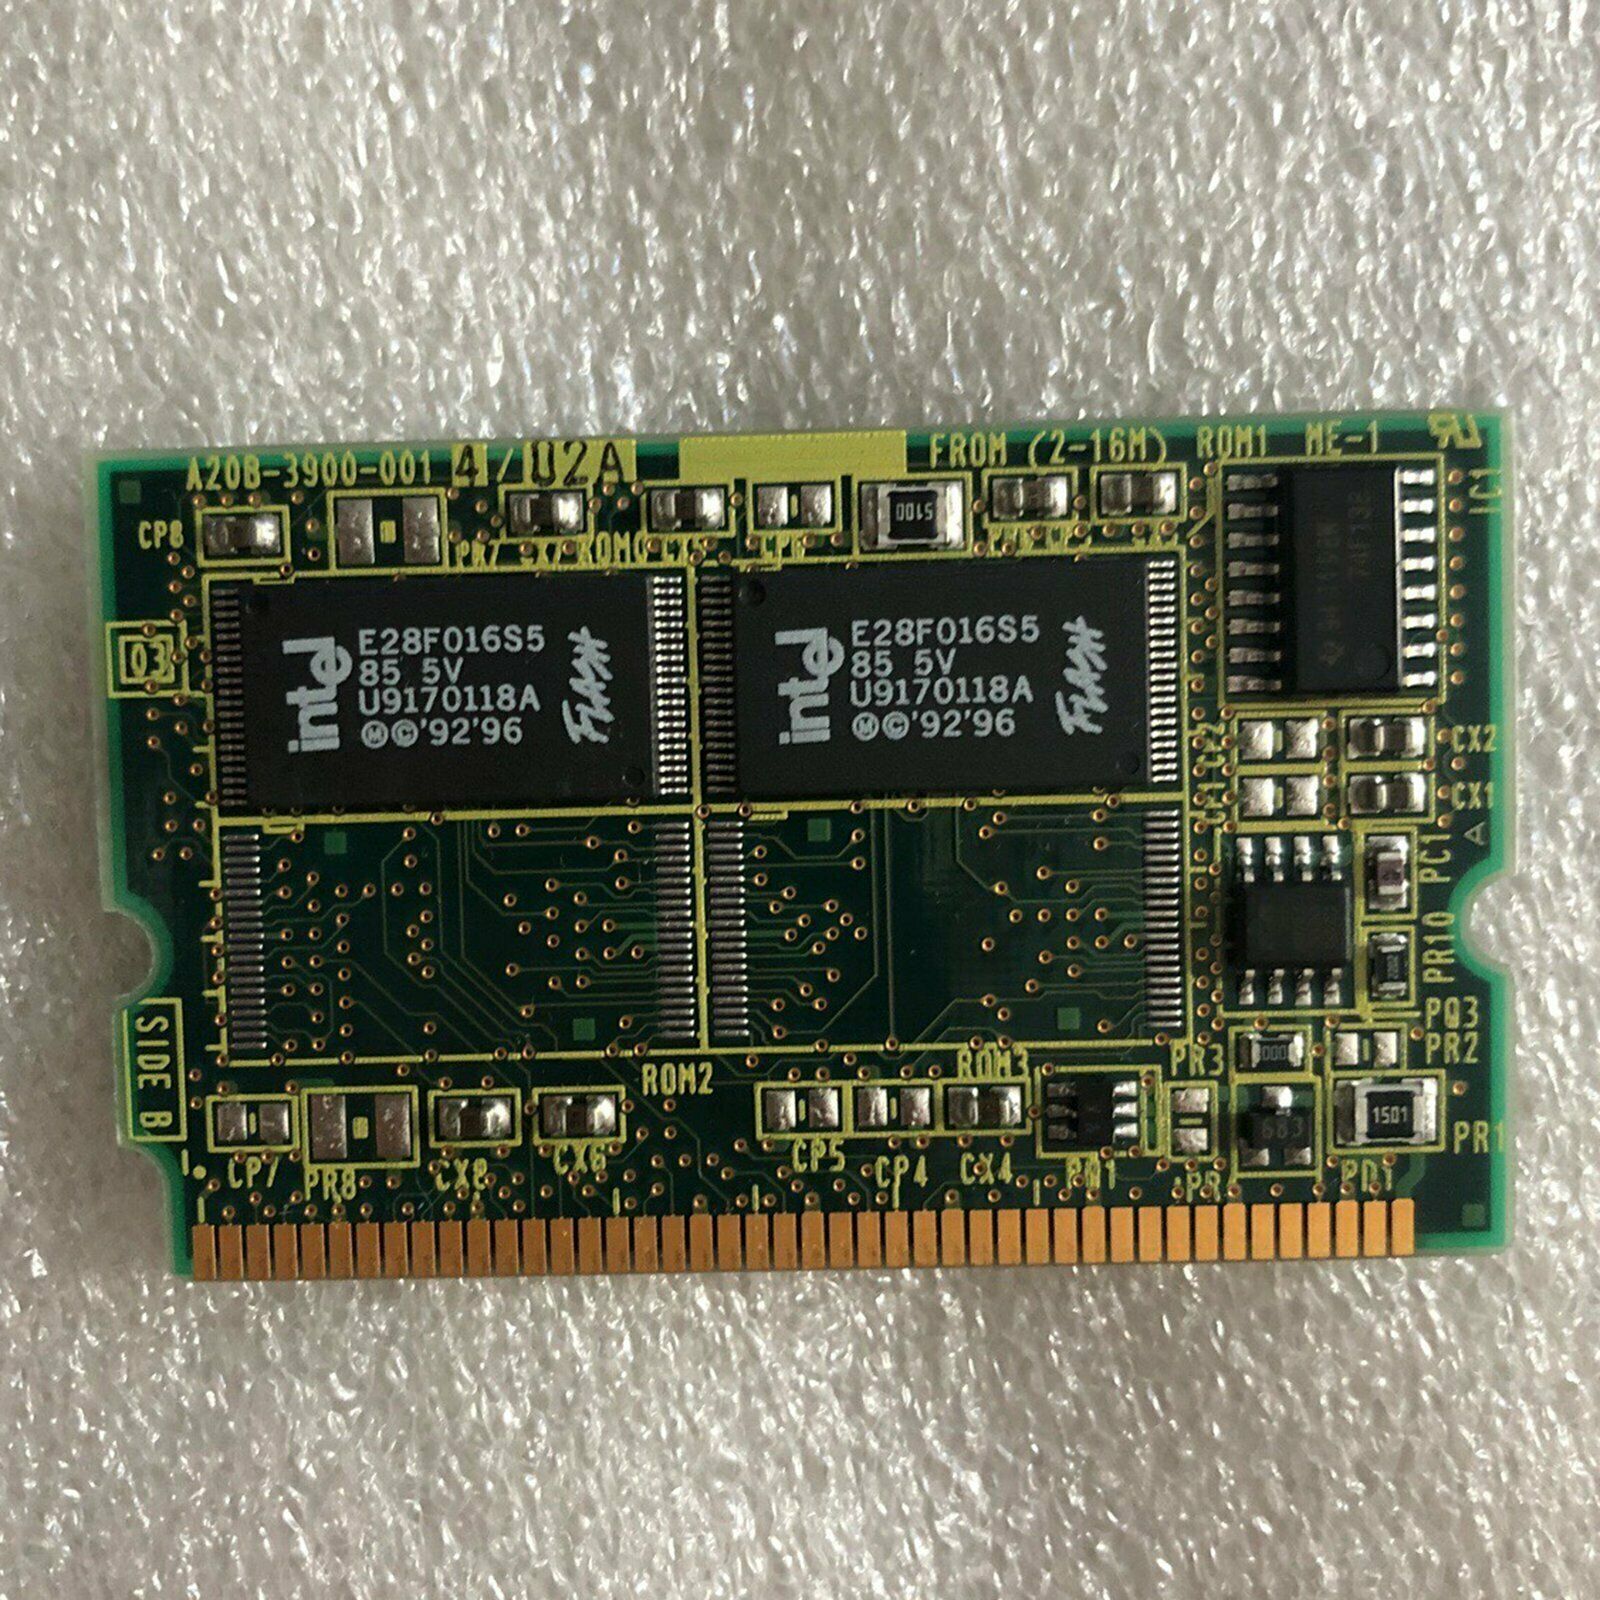 A20B-3900-0014 For Fanuc Used Memory Card 